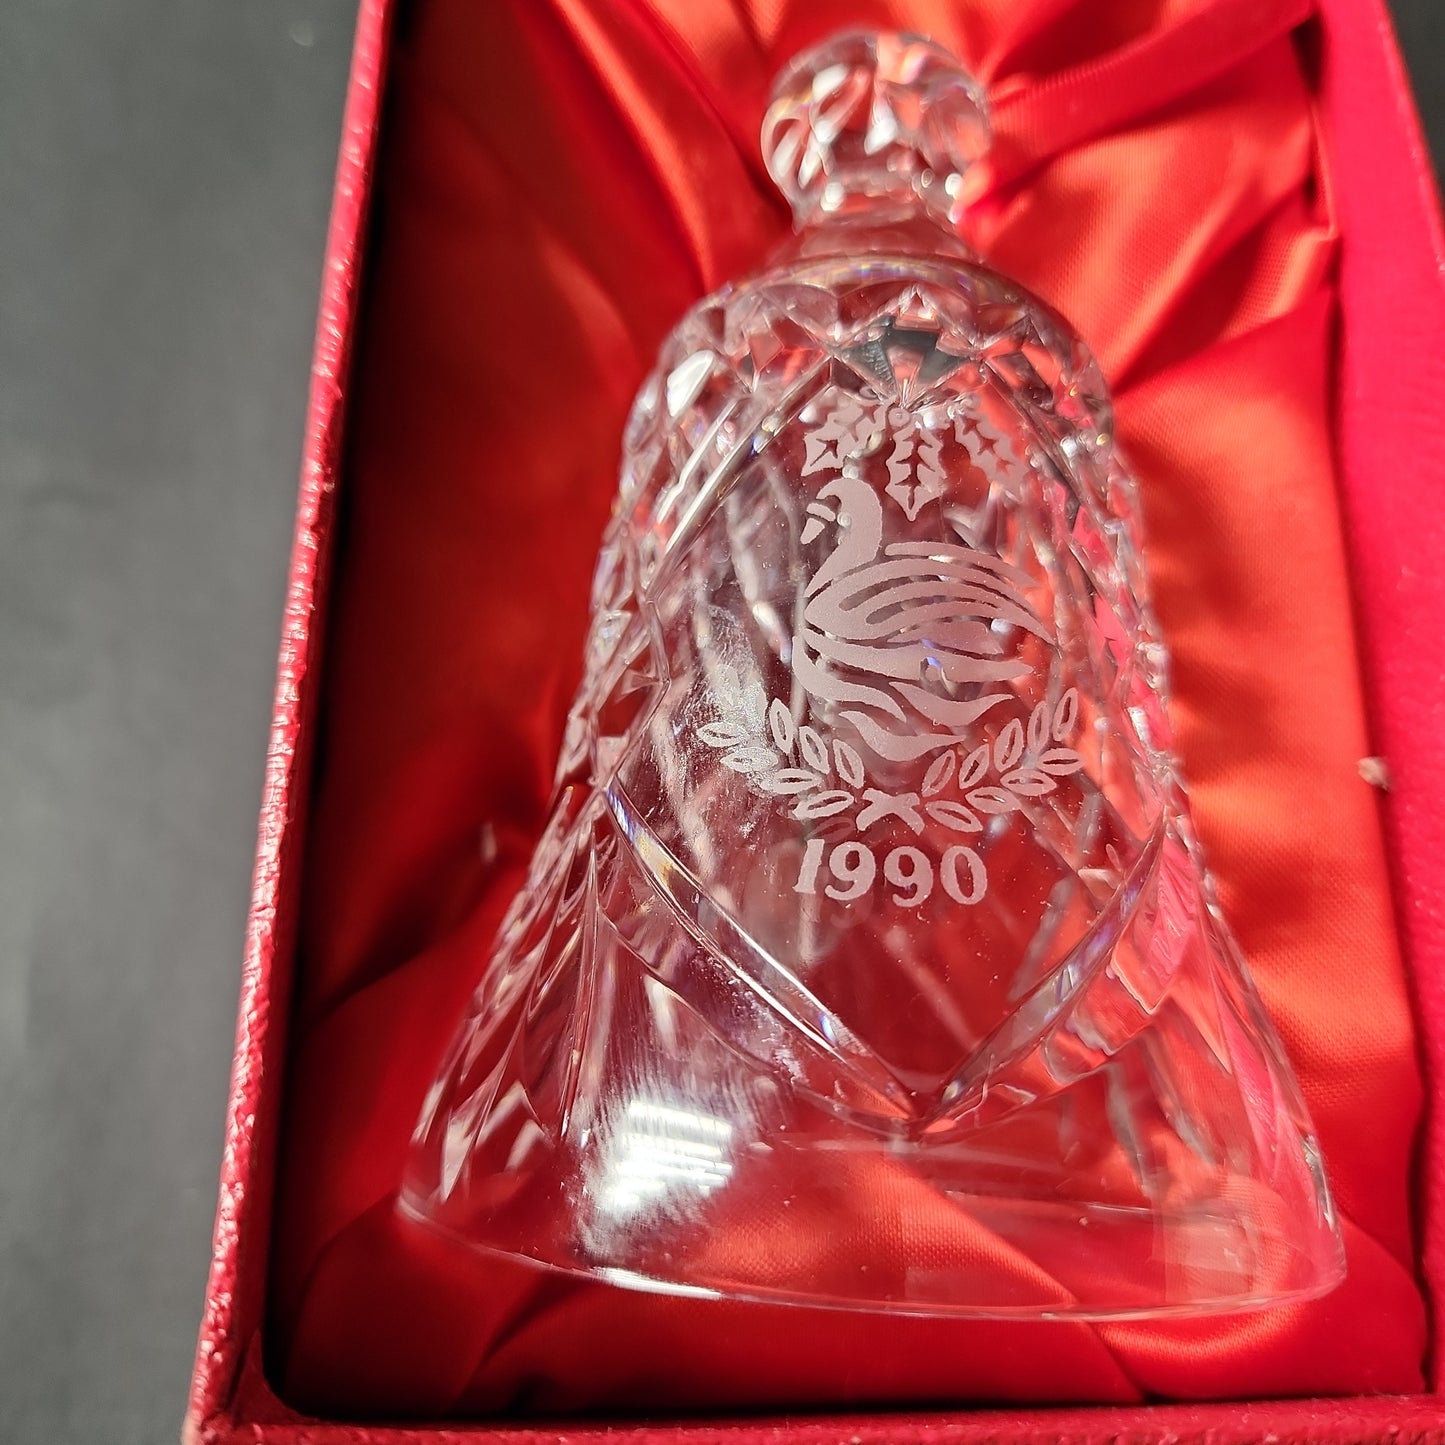 Signed Waterford cut glass 1990 Christmas bell